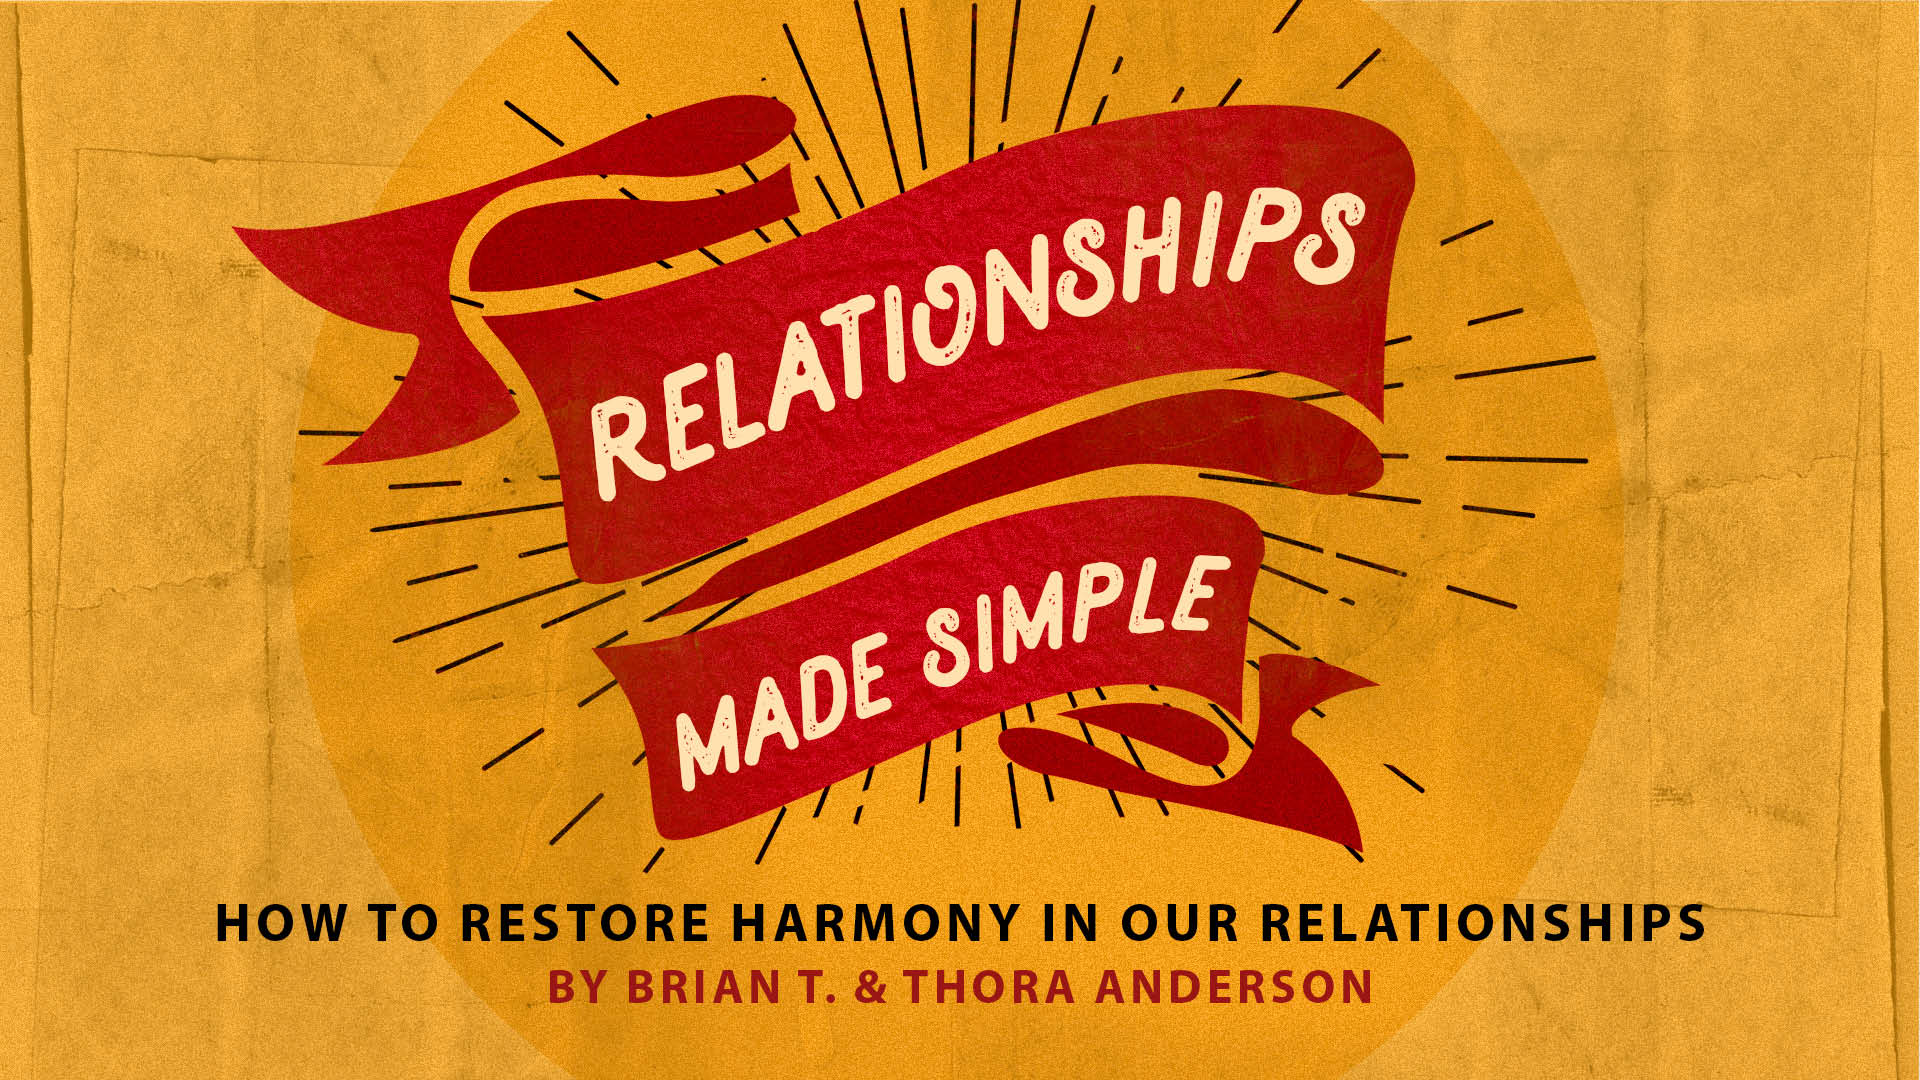 How to Restore Harmony in Our Relationships | Vineyard Church North Phoenix